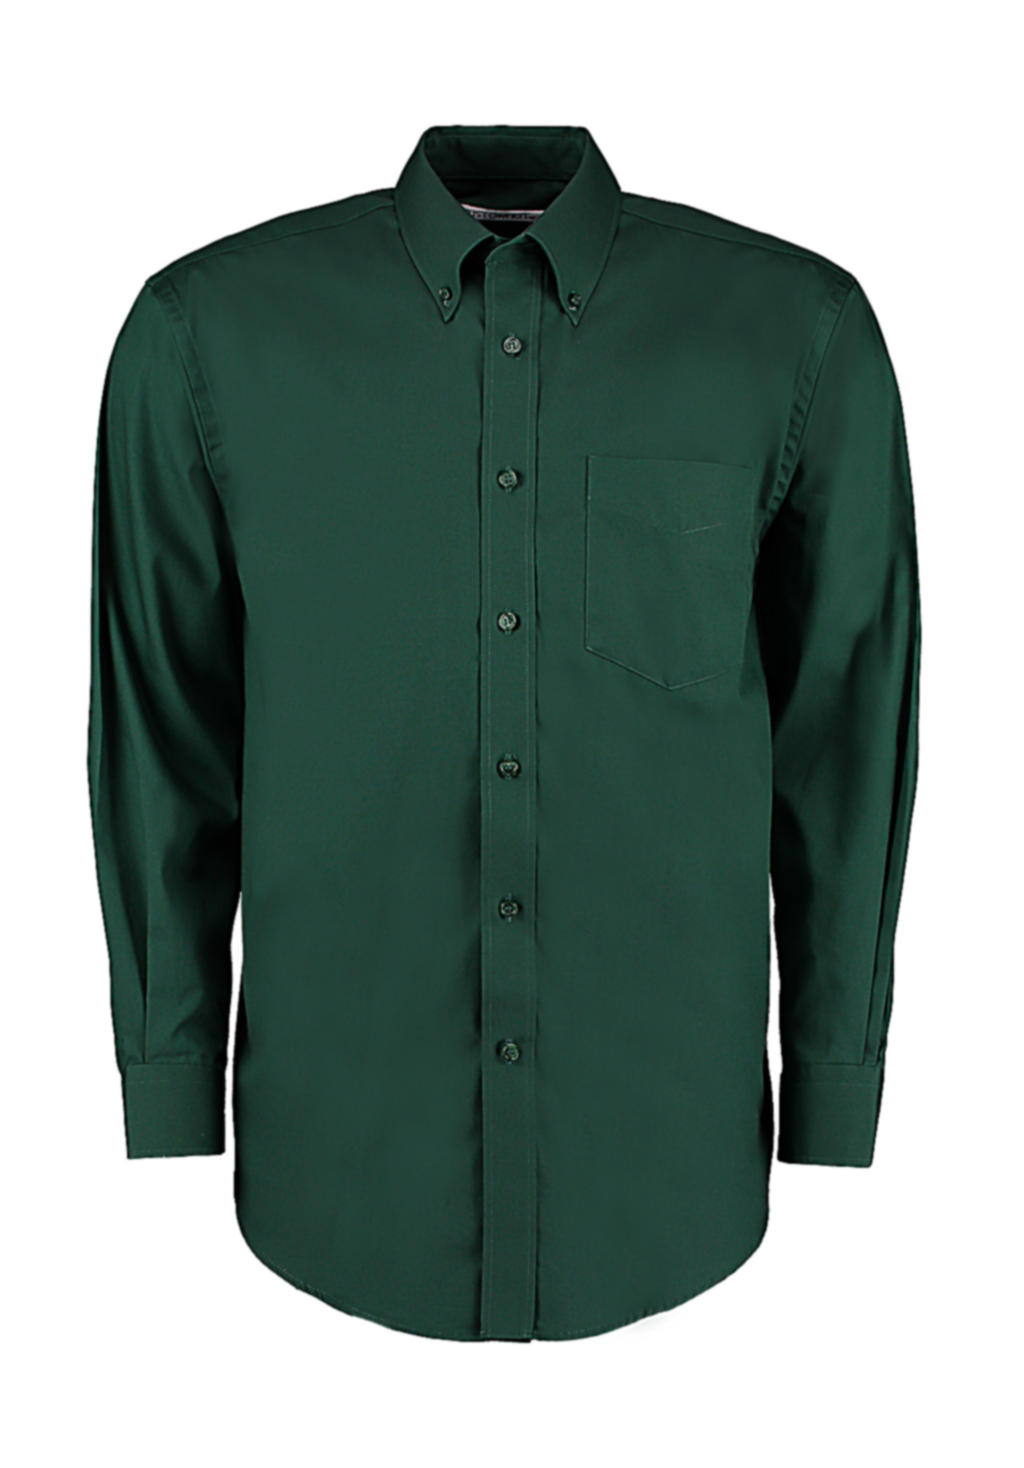  Classic Fit Premium Oxford Shirt in Farbe Bottle Green